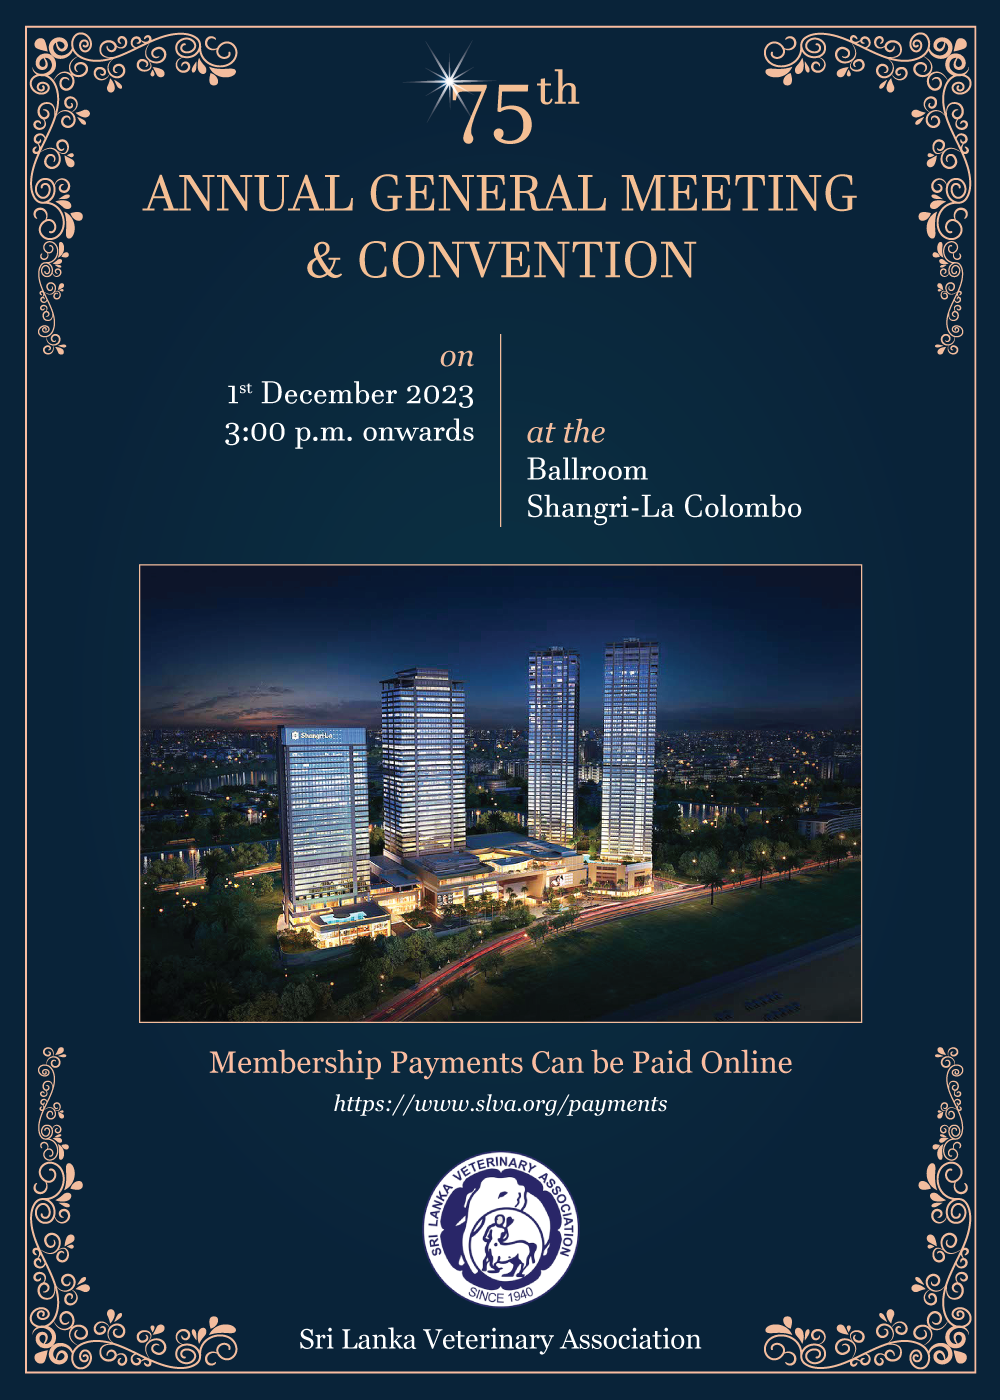 74th Annual General Meeting & Annual Convention 2022